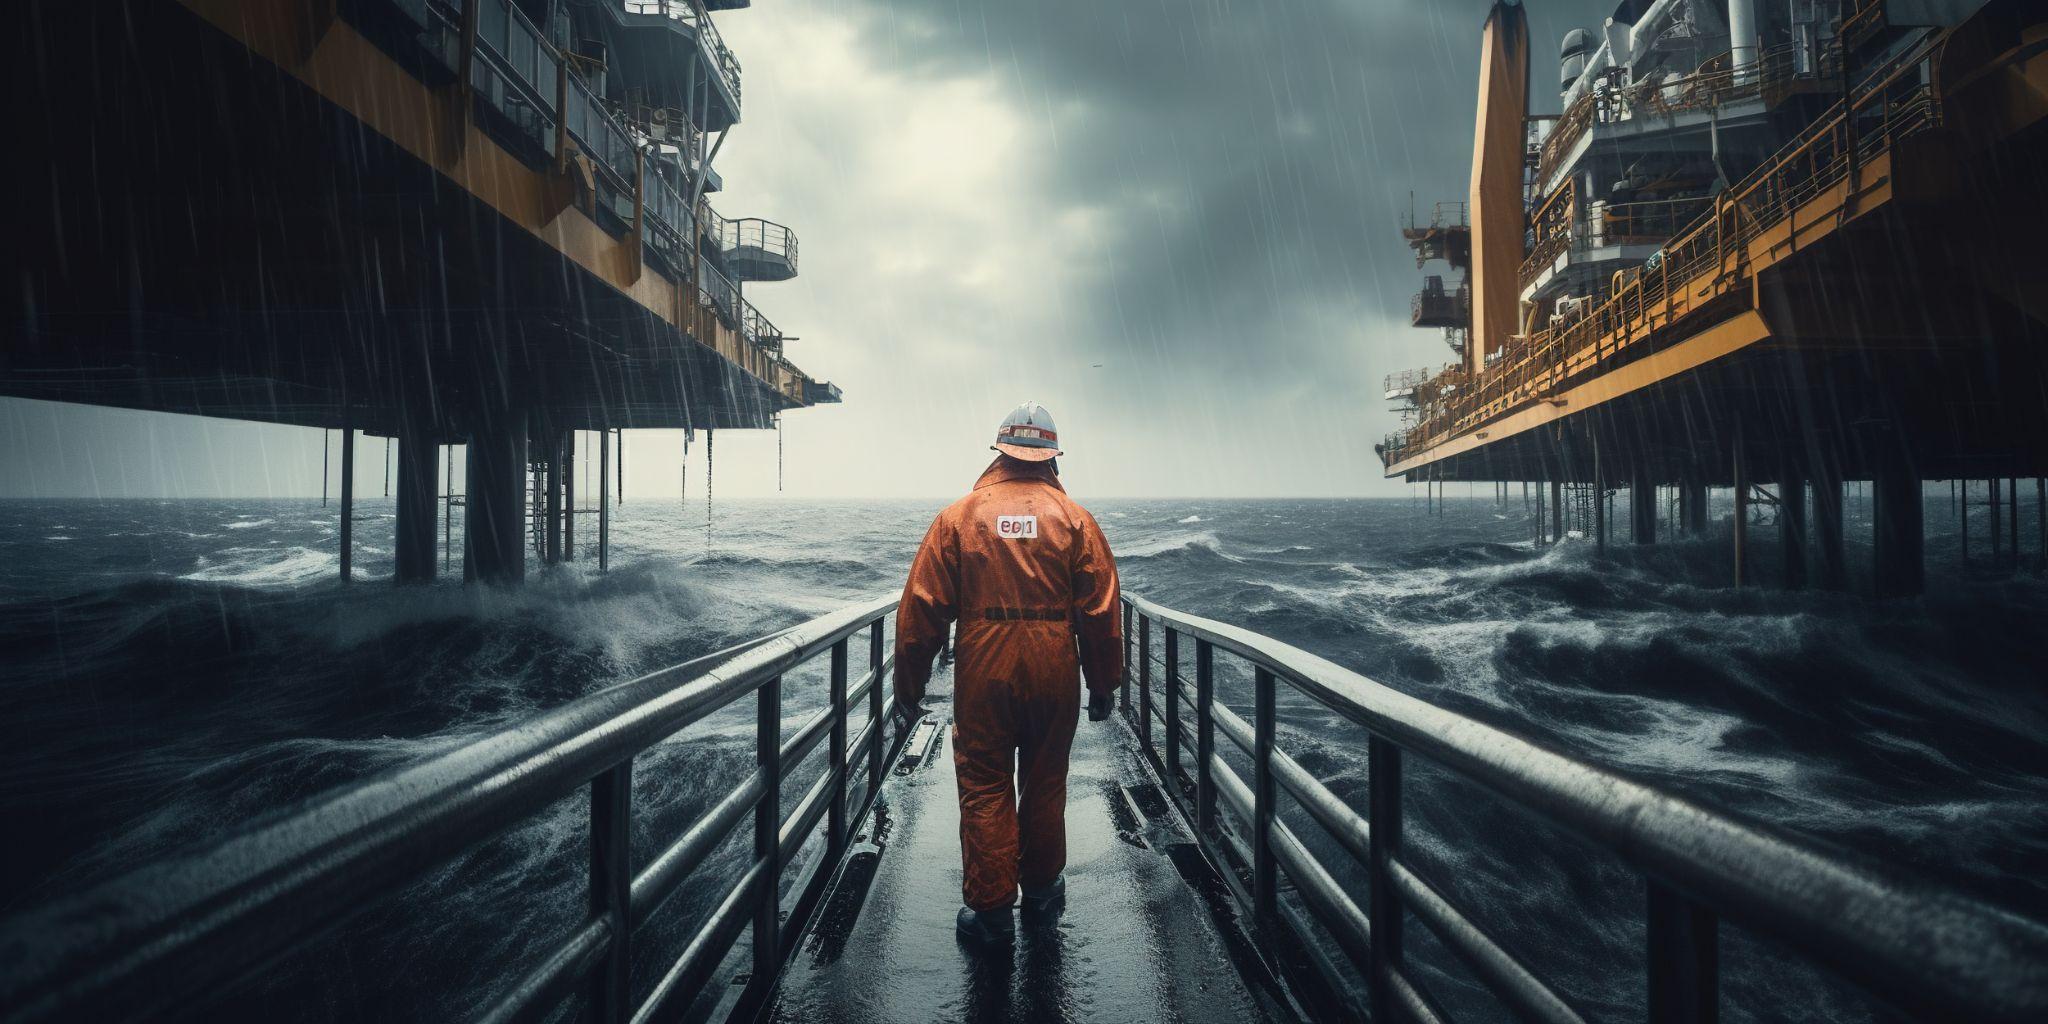 Worker at a offshore oil rig